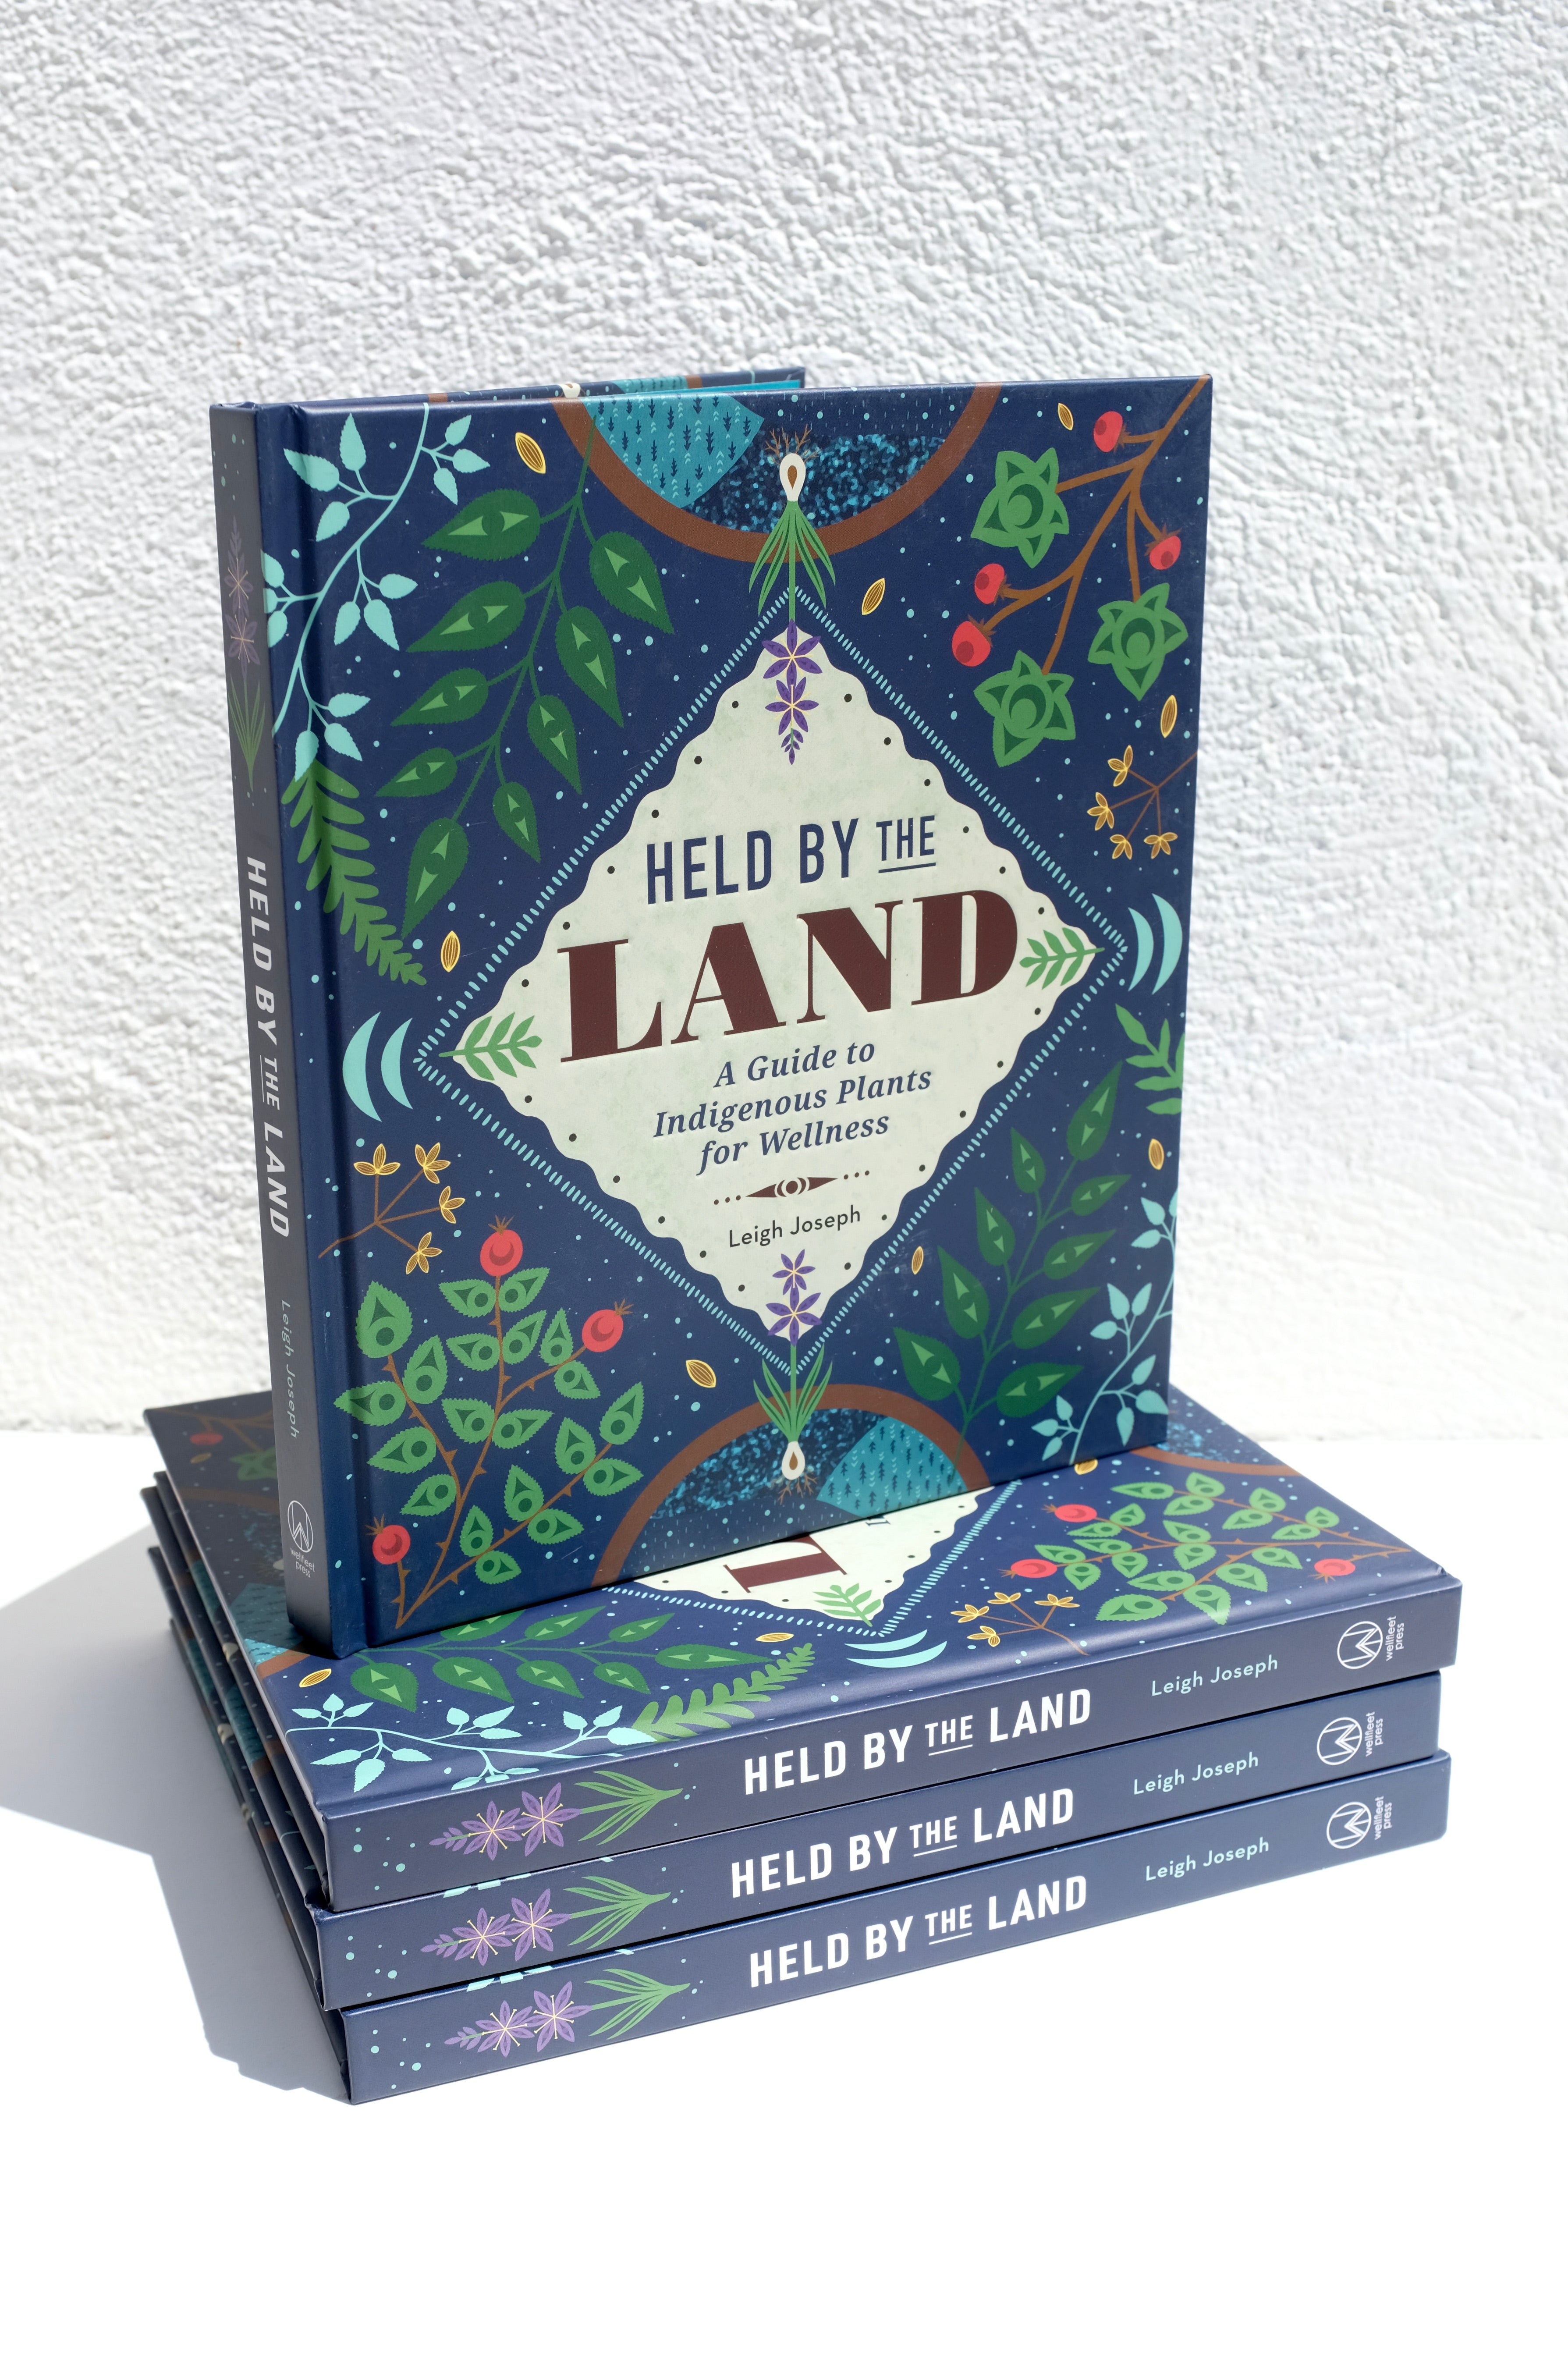 Held By The LandHeld by the Land: A Guide to Indigenous Plants for Wellness 